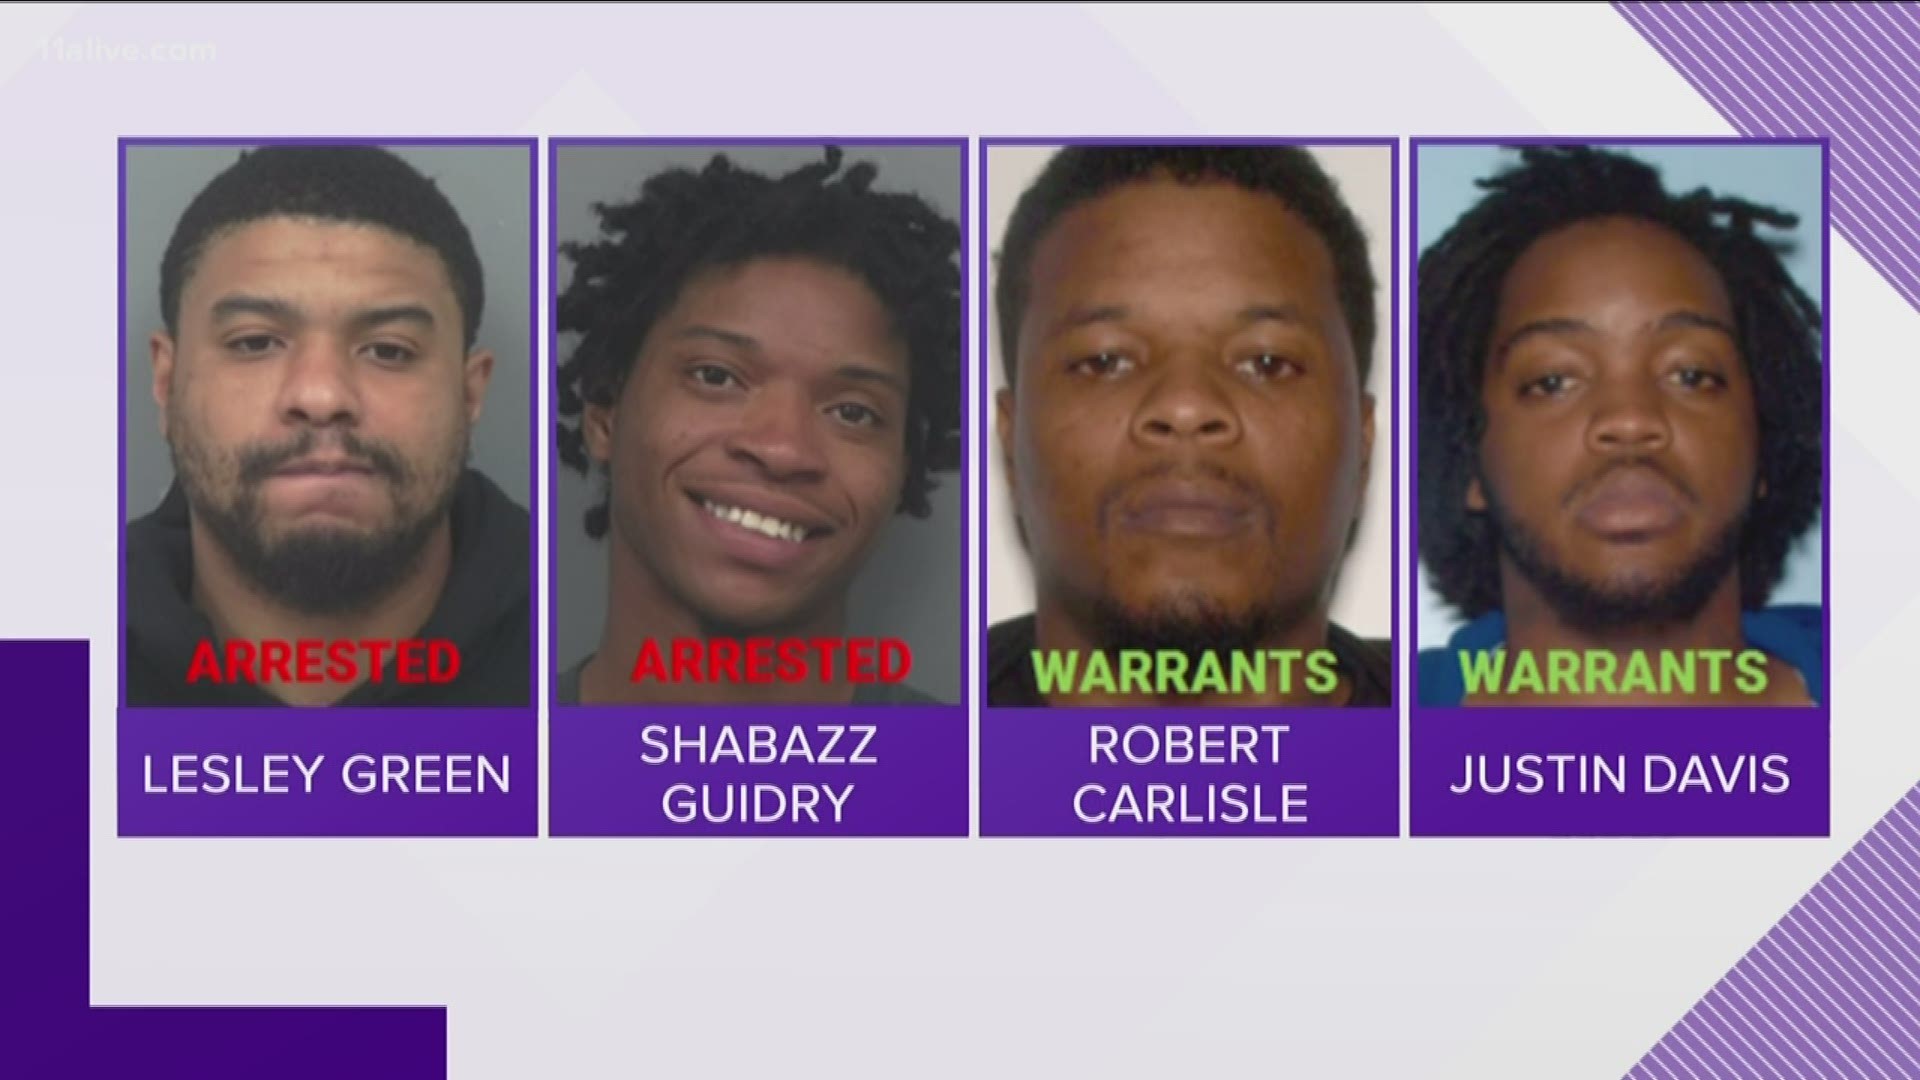 24-year-old Shabazz Giudry has been charged with concealing a death and gang activity after two men were found murdered at a storage unit in Gwinnett. Two other suspects are still on the run.